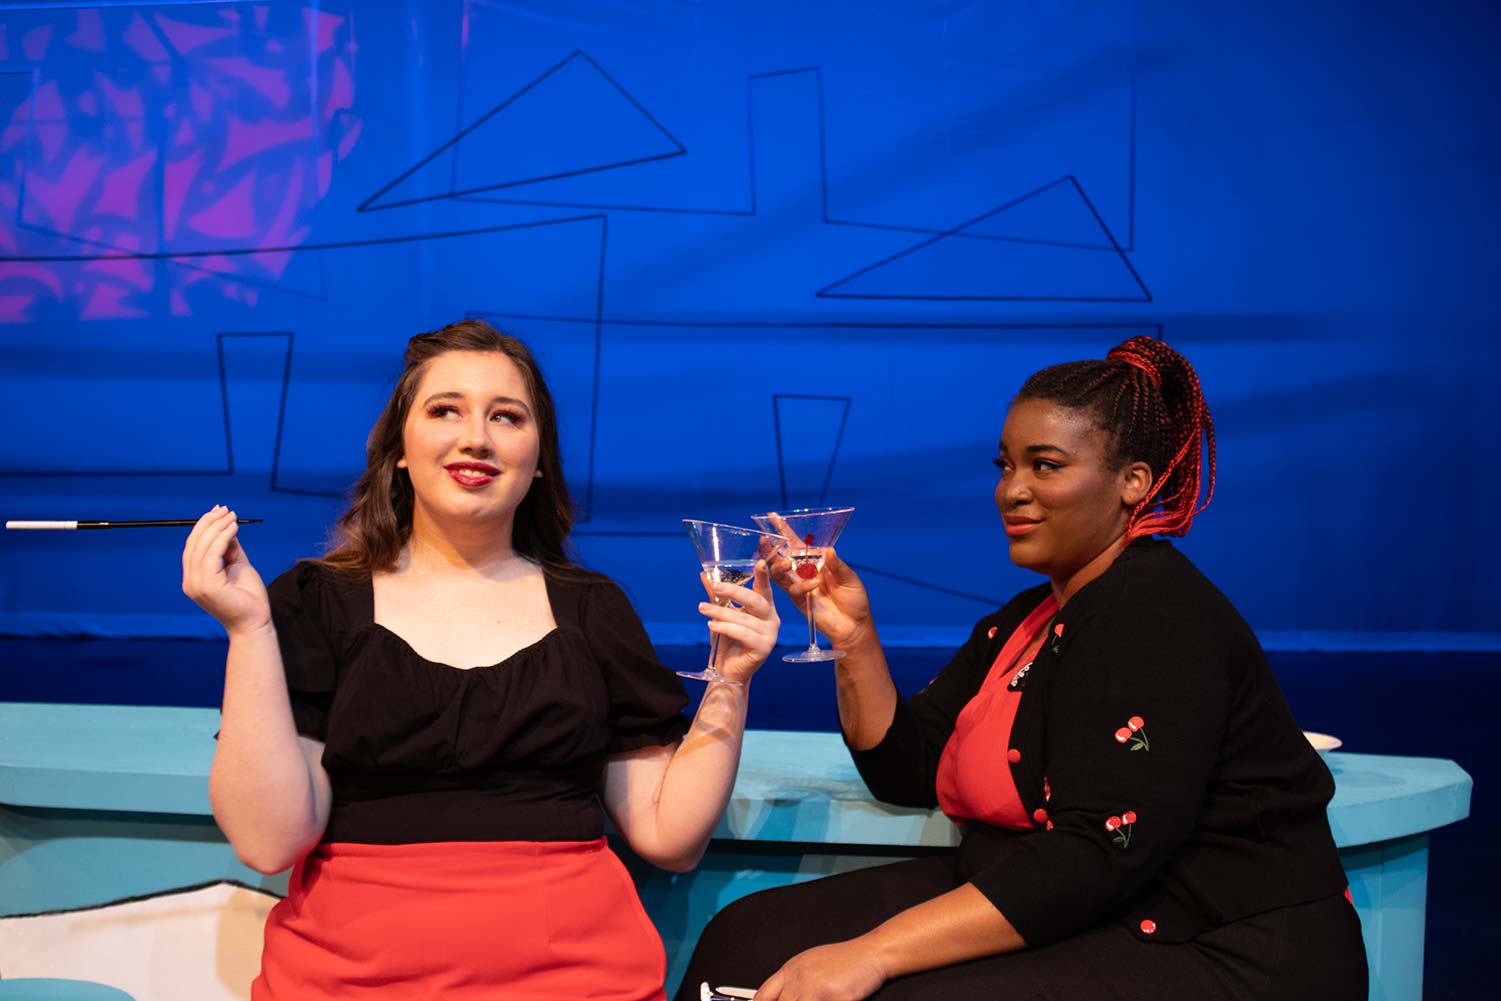 Gabbi Enriquez as Nym and Nae Nae Hughes as Pistol clink glasses at the bar, April 27. They will perform these roles alongside their co-actors this weekend from Friday to Sunday.